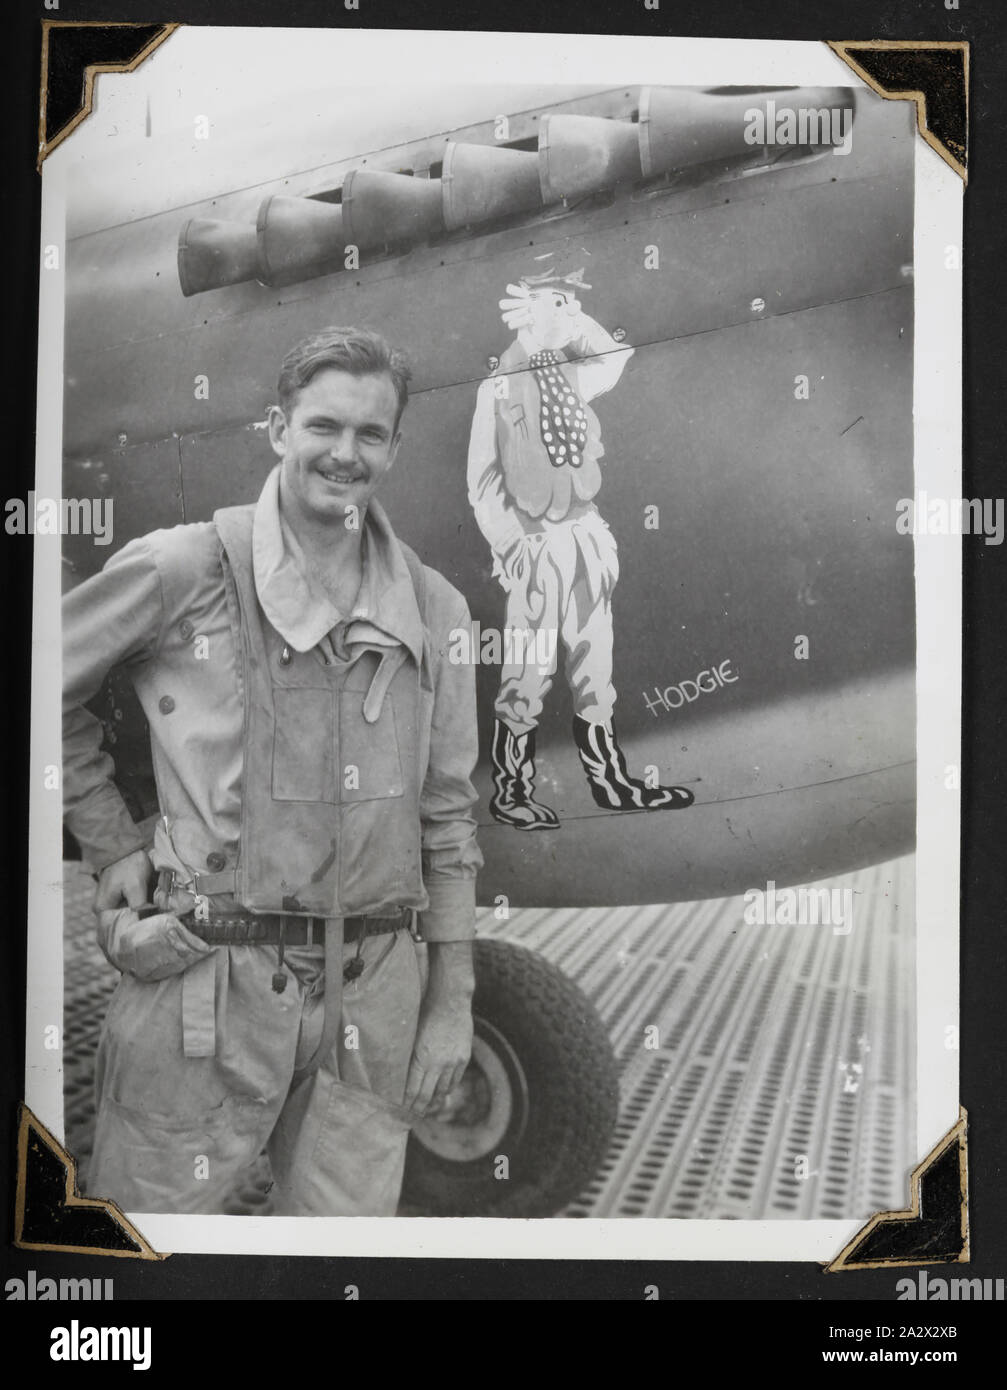 Photograph - 'F/O J.A.T Hodgkinson & Aircraft Mascot', New Guinea, 1942-1945, Black and white photograph of Flying Officer (F/O) J.A.T Hodgkinson. One of 116 photographs in a photographic album held by Pilot Officer Colin Keon-Cohen. These are very good images of life in Singapore with 205 Sqn RAF, then 77 Sqn RAAF, World War II era Stock Photo